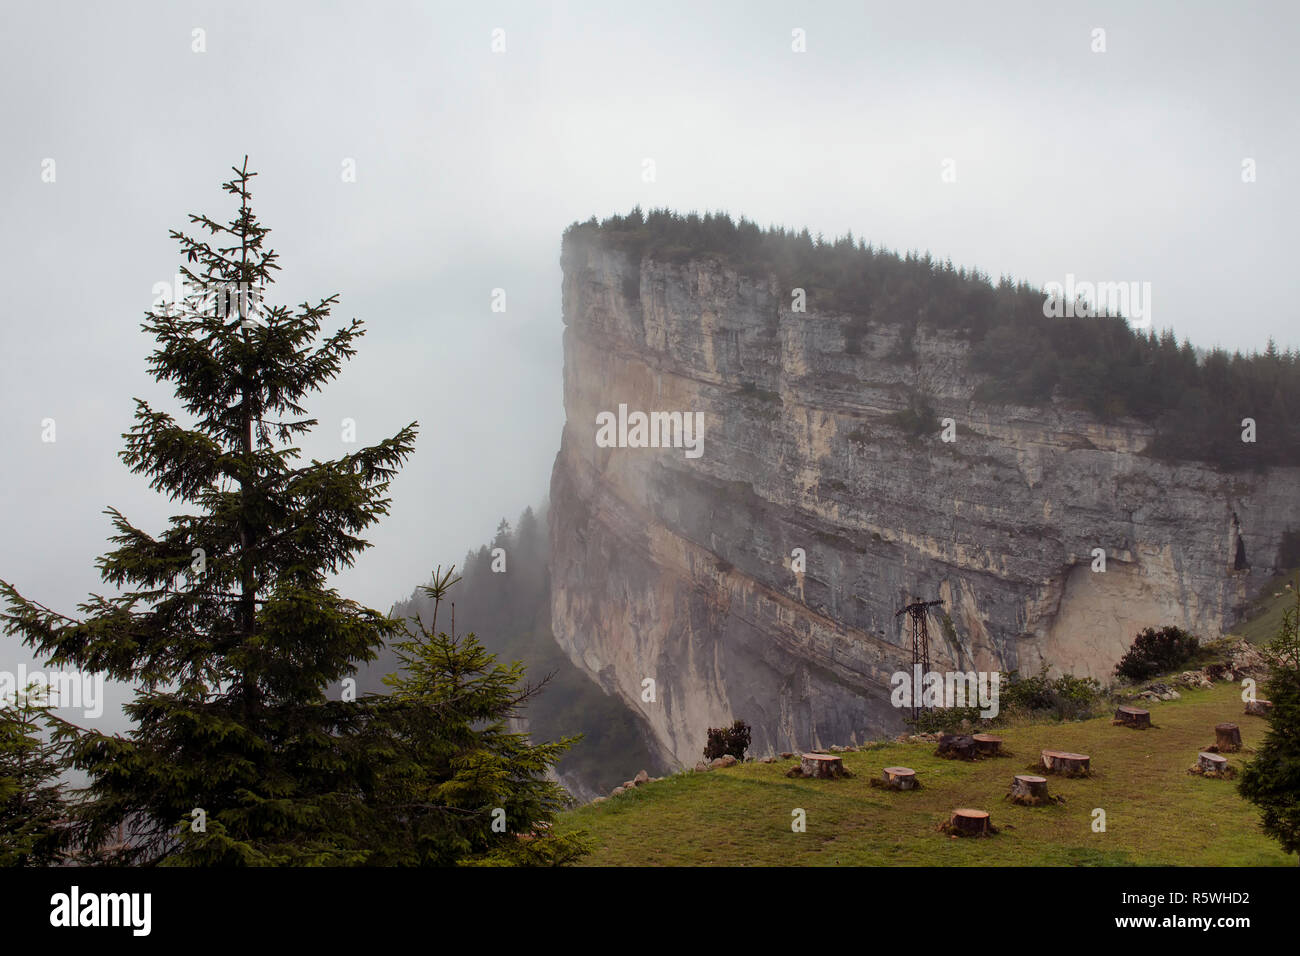 View of a big rock on top of a mountain, trees and beautiful nature in fog. The image is captured in Trabzon/Rize area of Black Sea region located at  Stock Photo